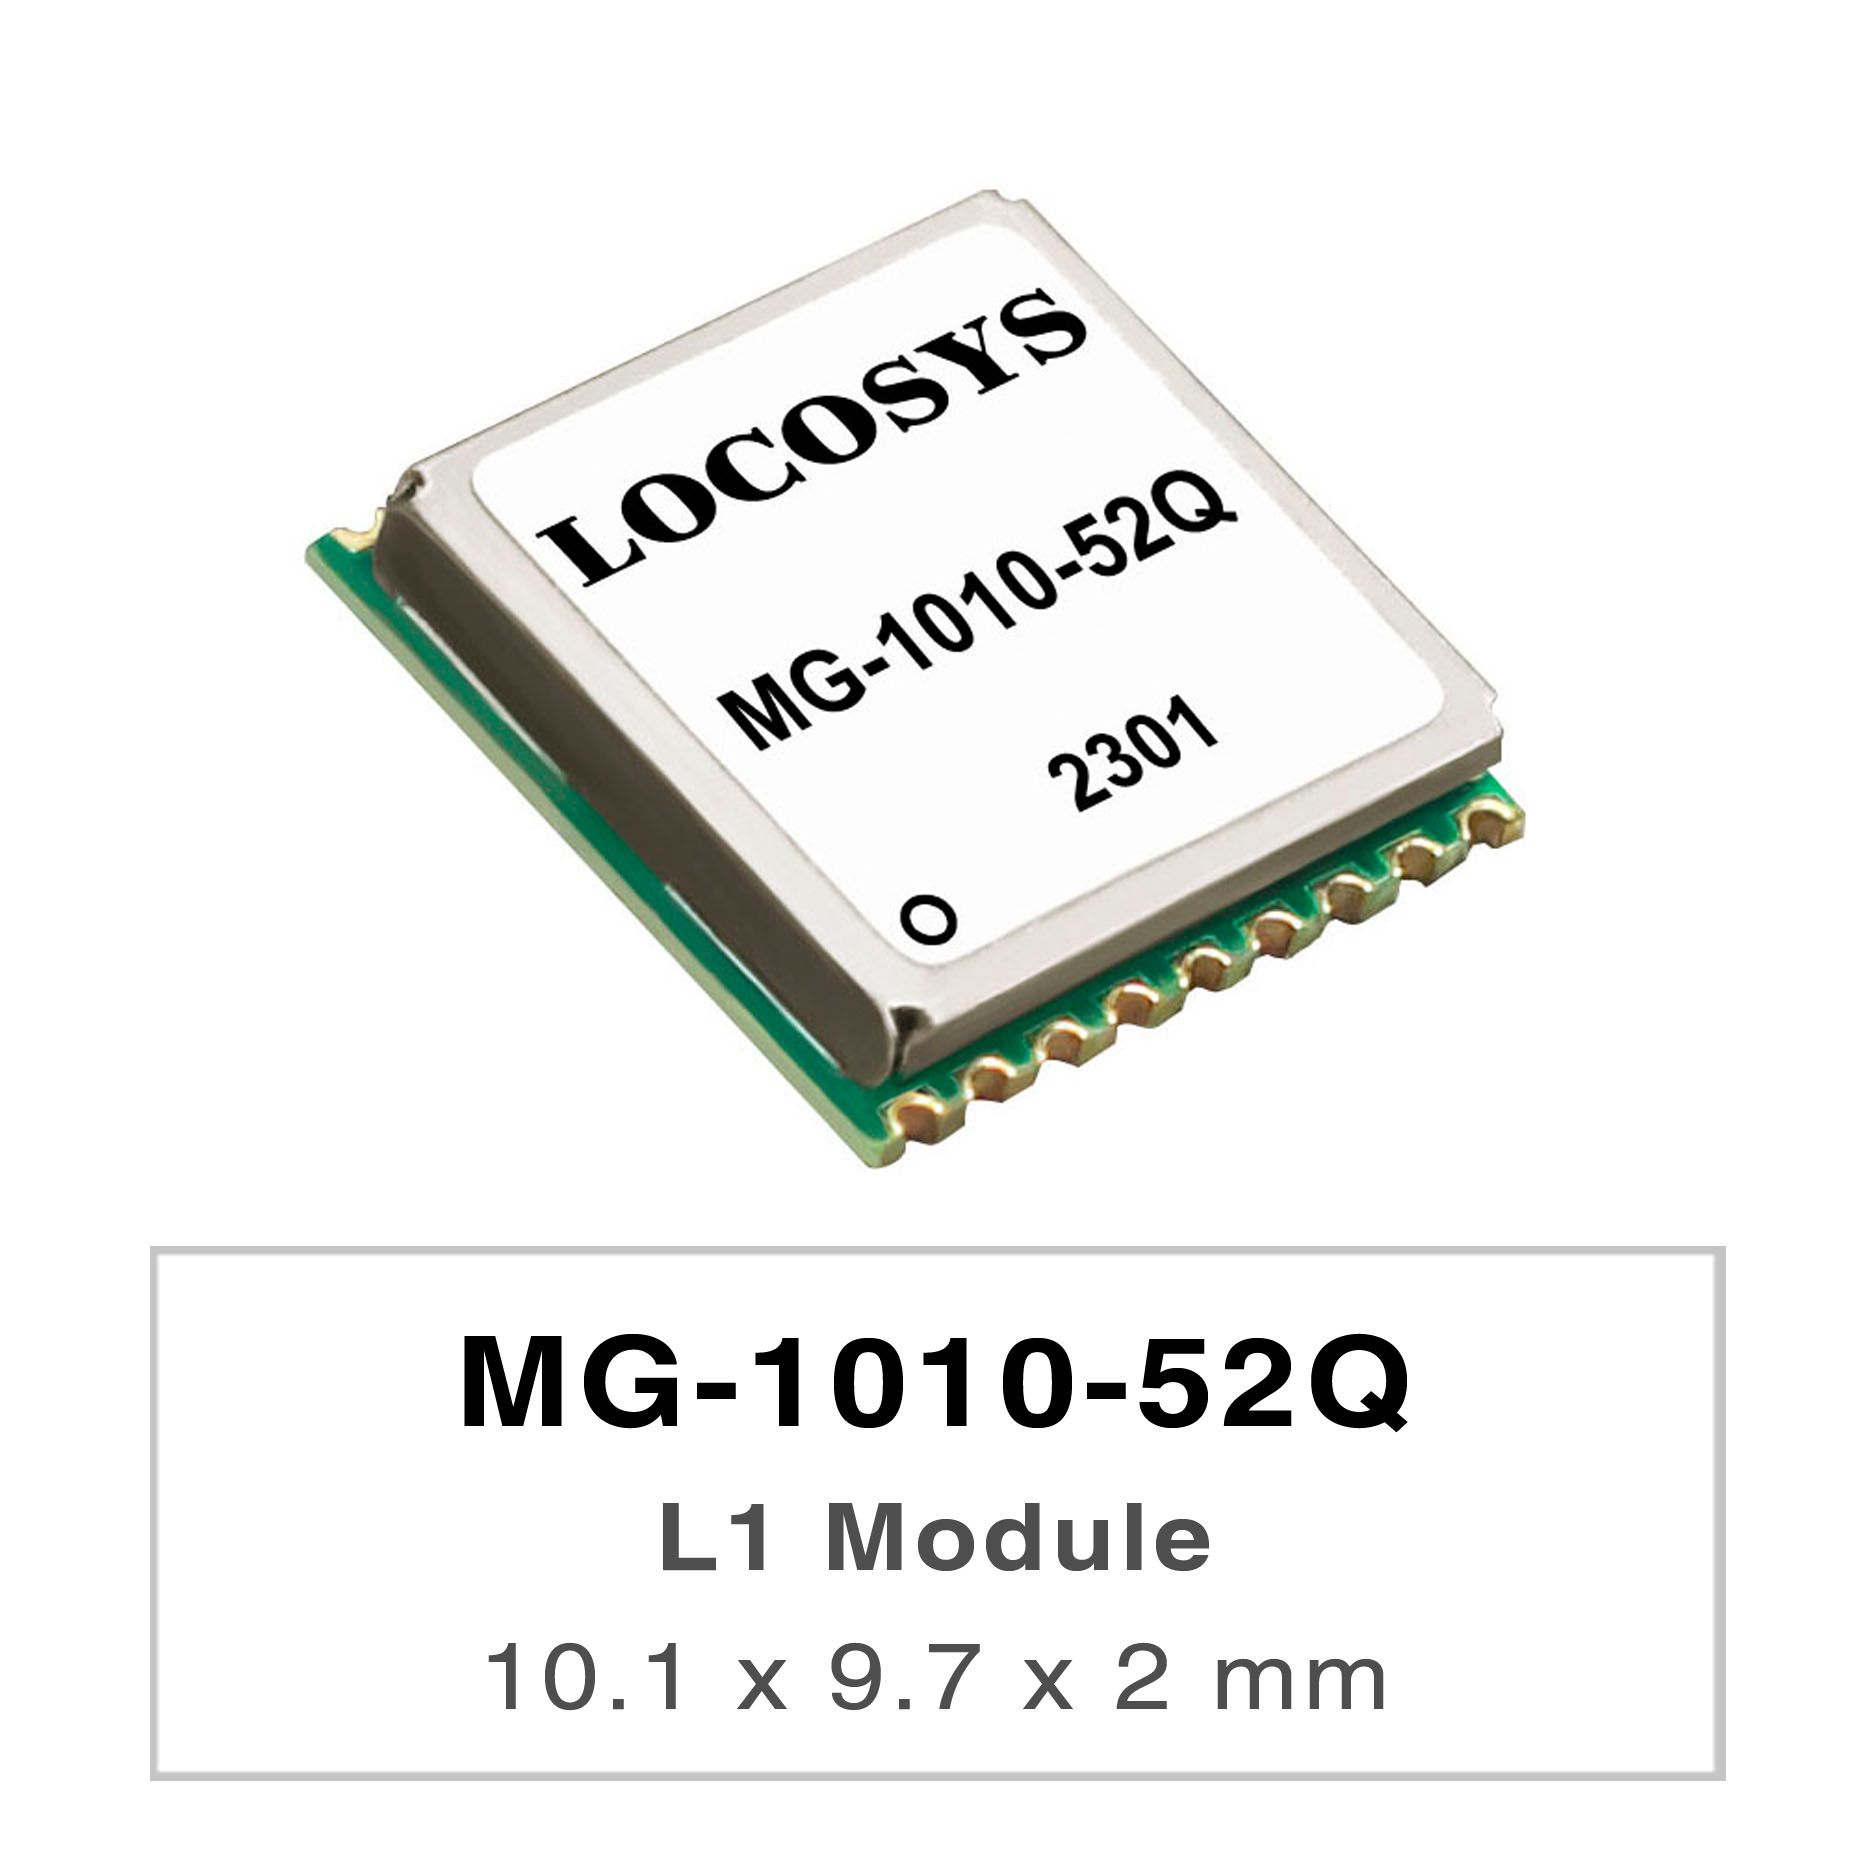 LOCOSYS MG-1010-52Q is a complete standalone GNSS module.